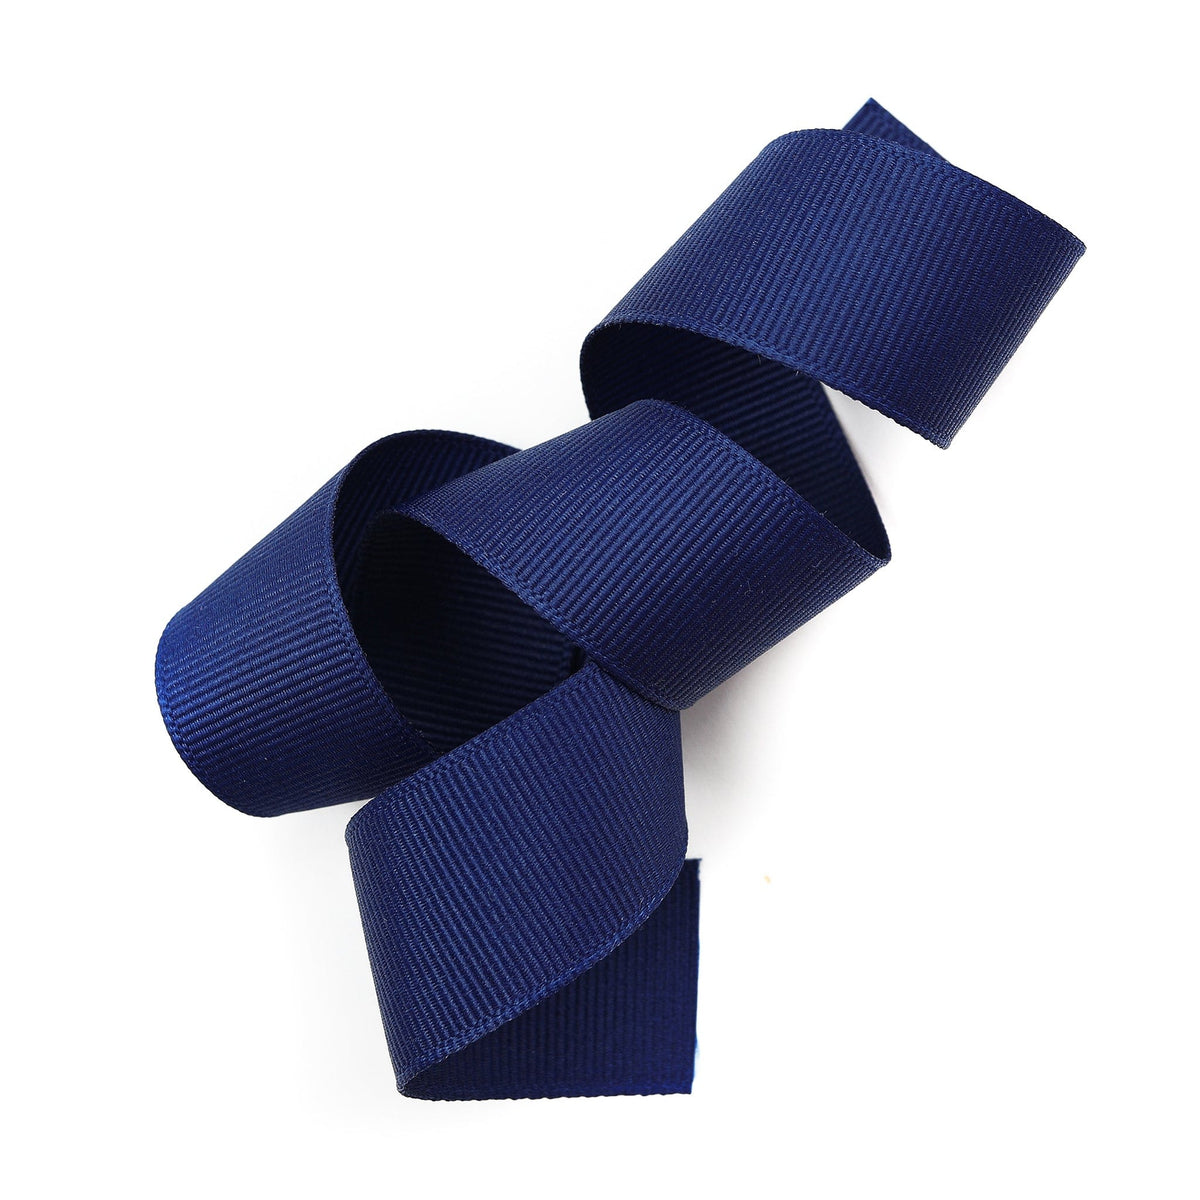 Navy Blue Large Square Magnetic Gift Boxes With Changeable Ribbon